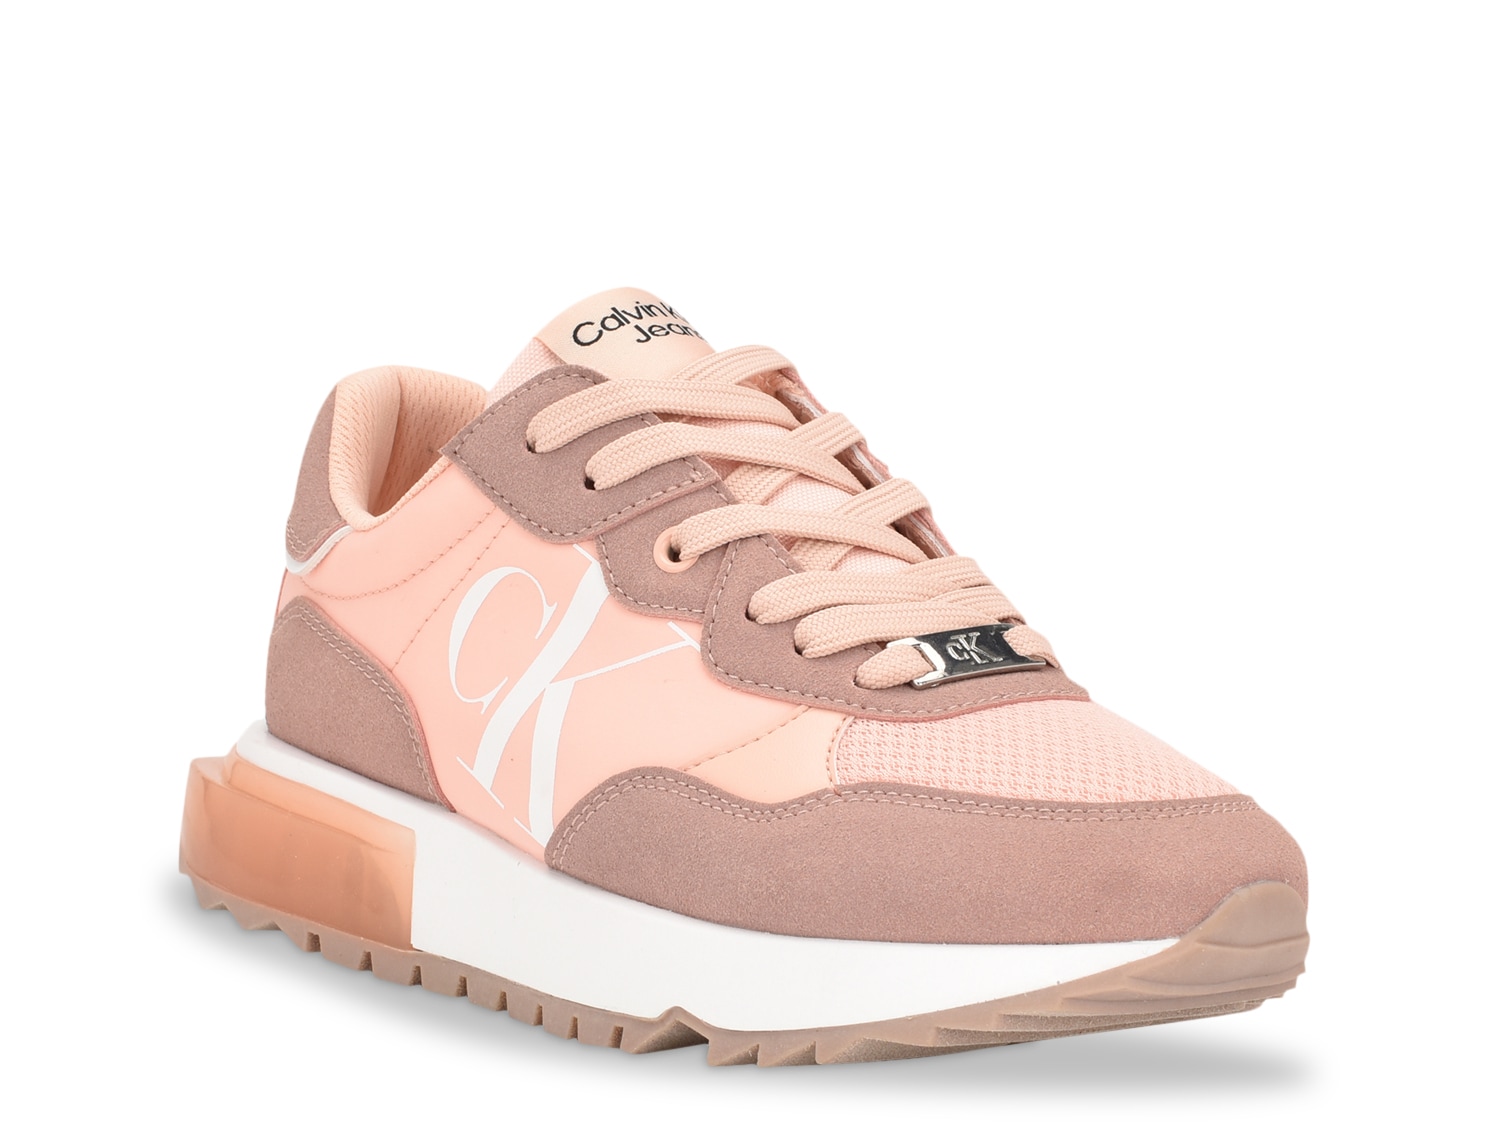 Calvin Klein Magalee Sneaker DSW Shipping Free - 